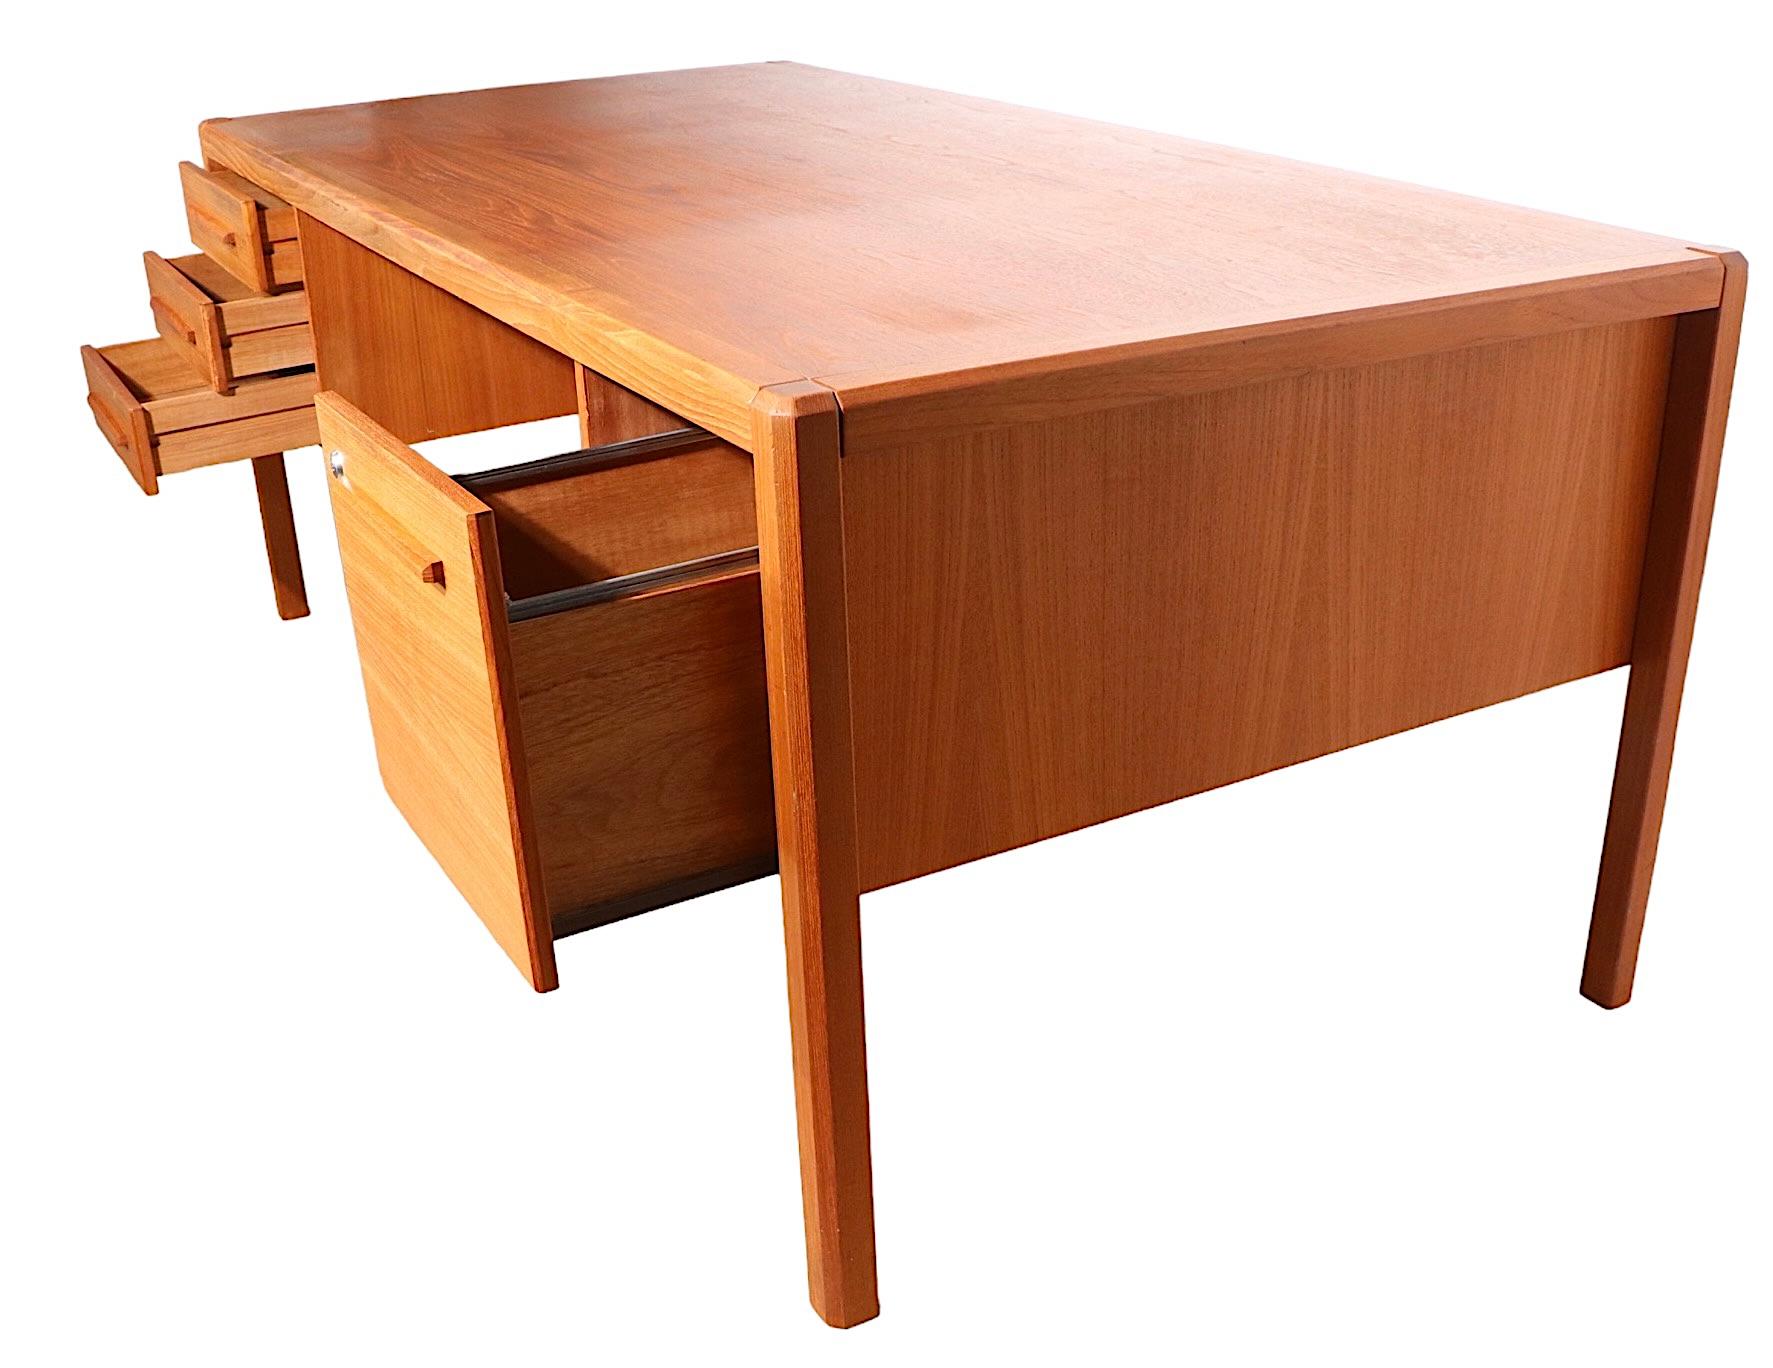 Exceptional large executive style Danish, Mid-Century Modern teak desk. The desk features two banks of drawers , one being a deep file drawer, with an opposing bookcase front. Large enough to function in a commercial environment, but not too large